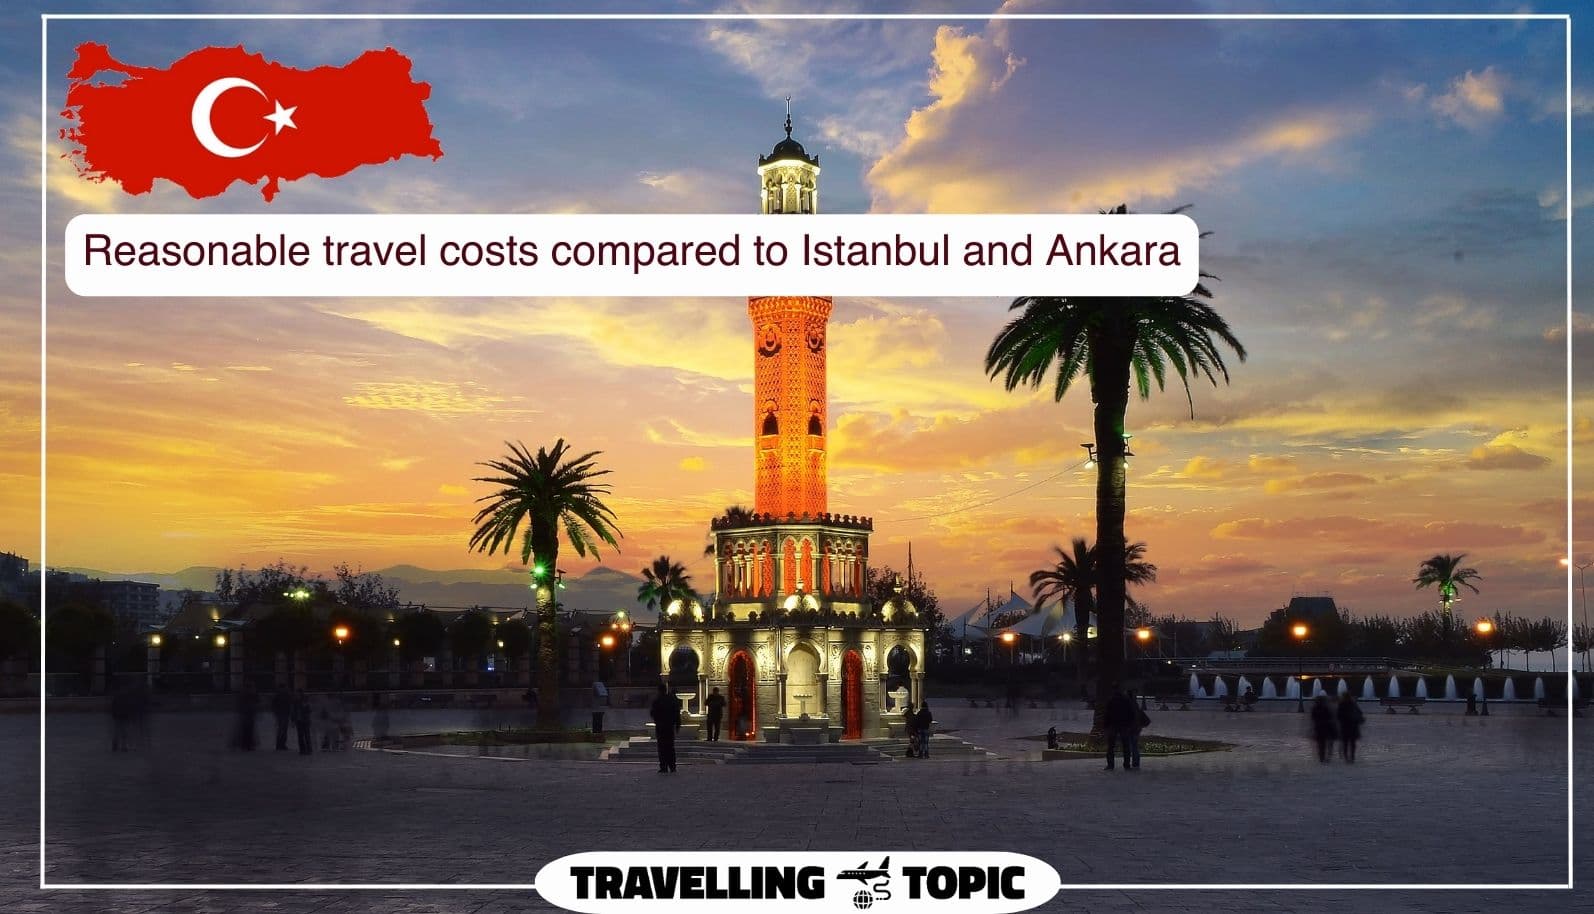 Reasonable travel costs compared to Istanbul and Ankara